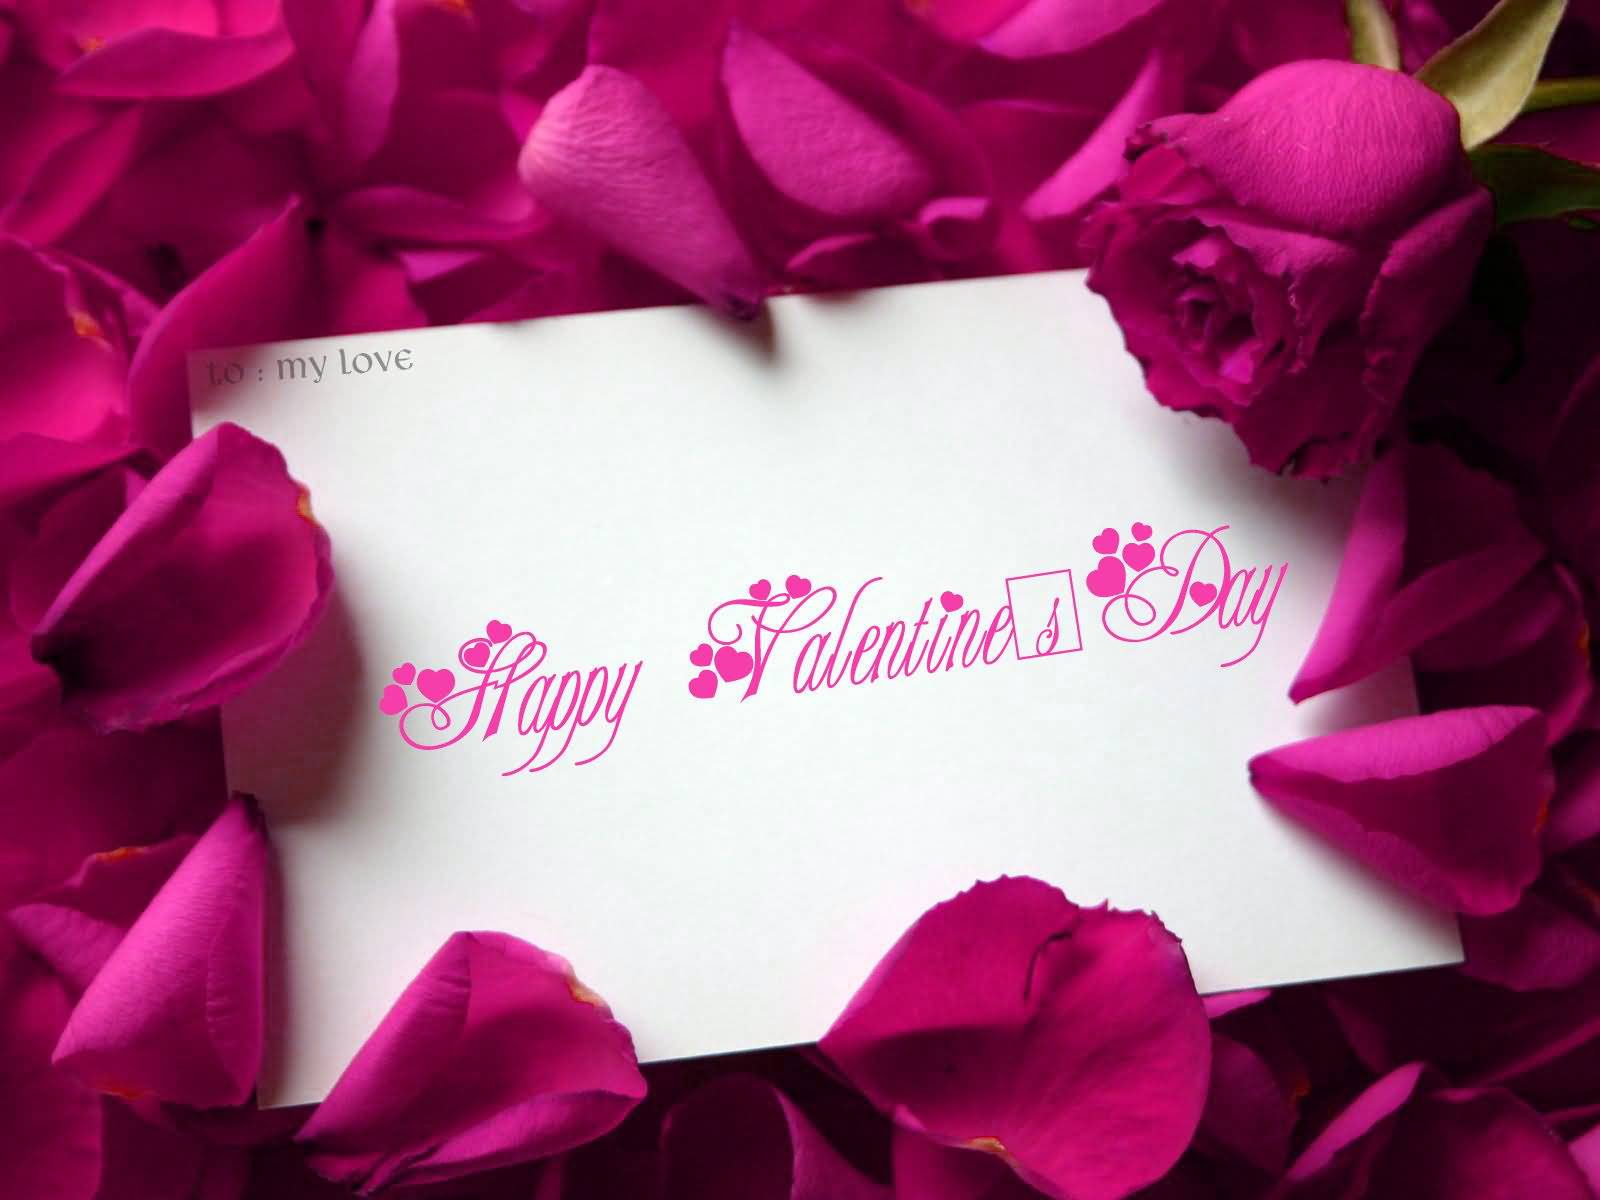 Happy Valentine’s Day Greeting Card With Flower Petals